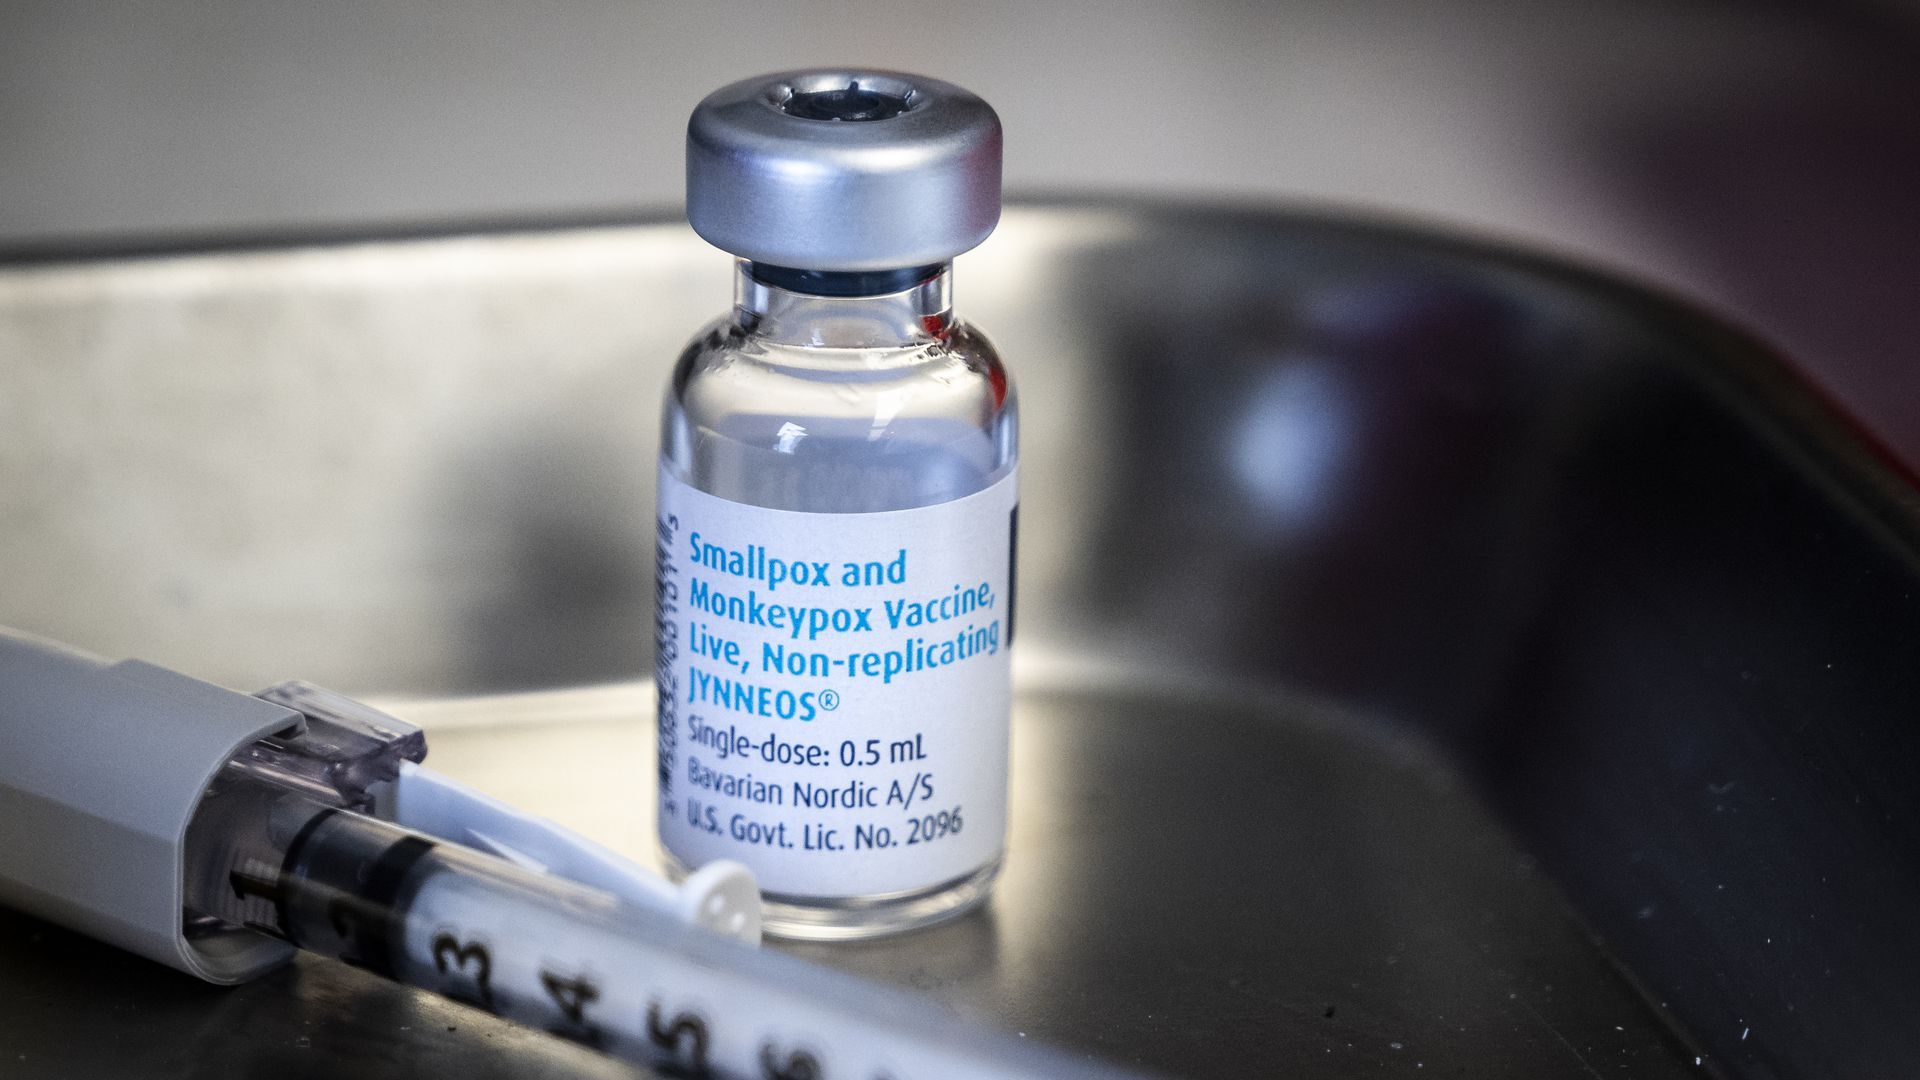 A photo of a monkeypox and smallpox vaccine